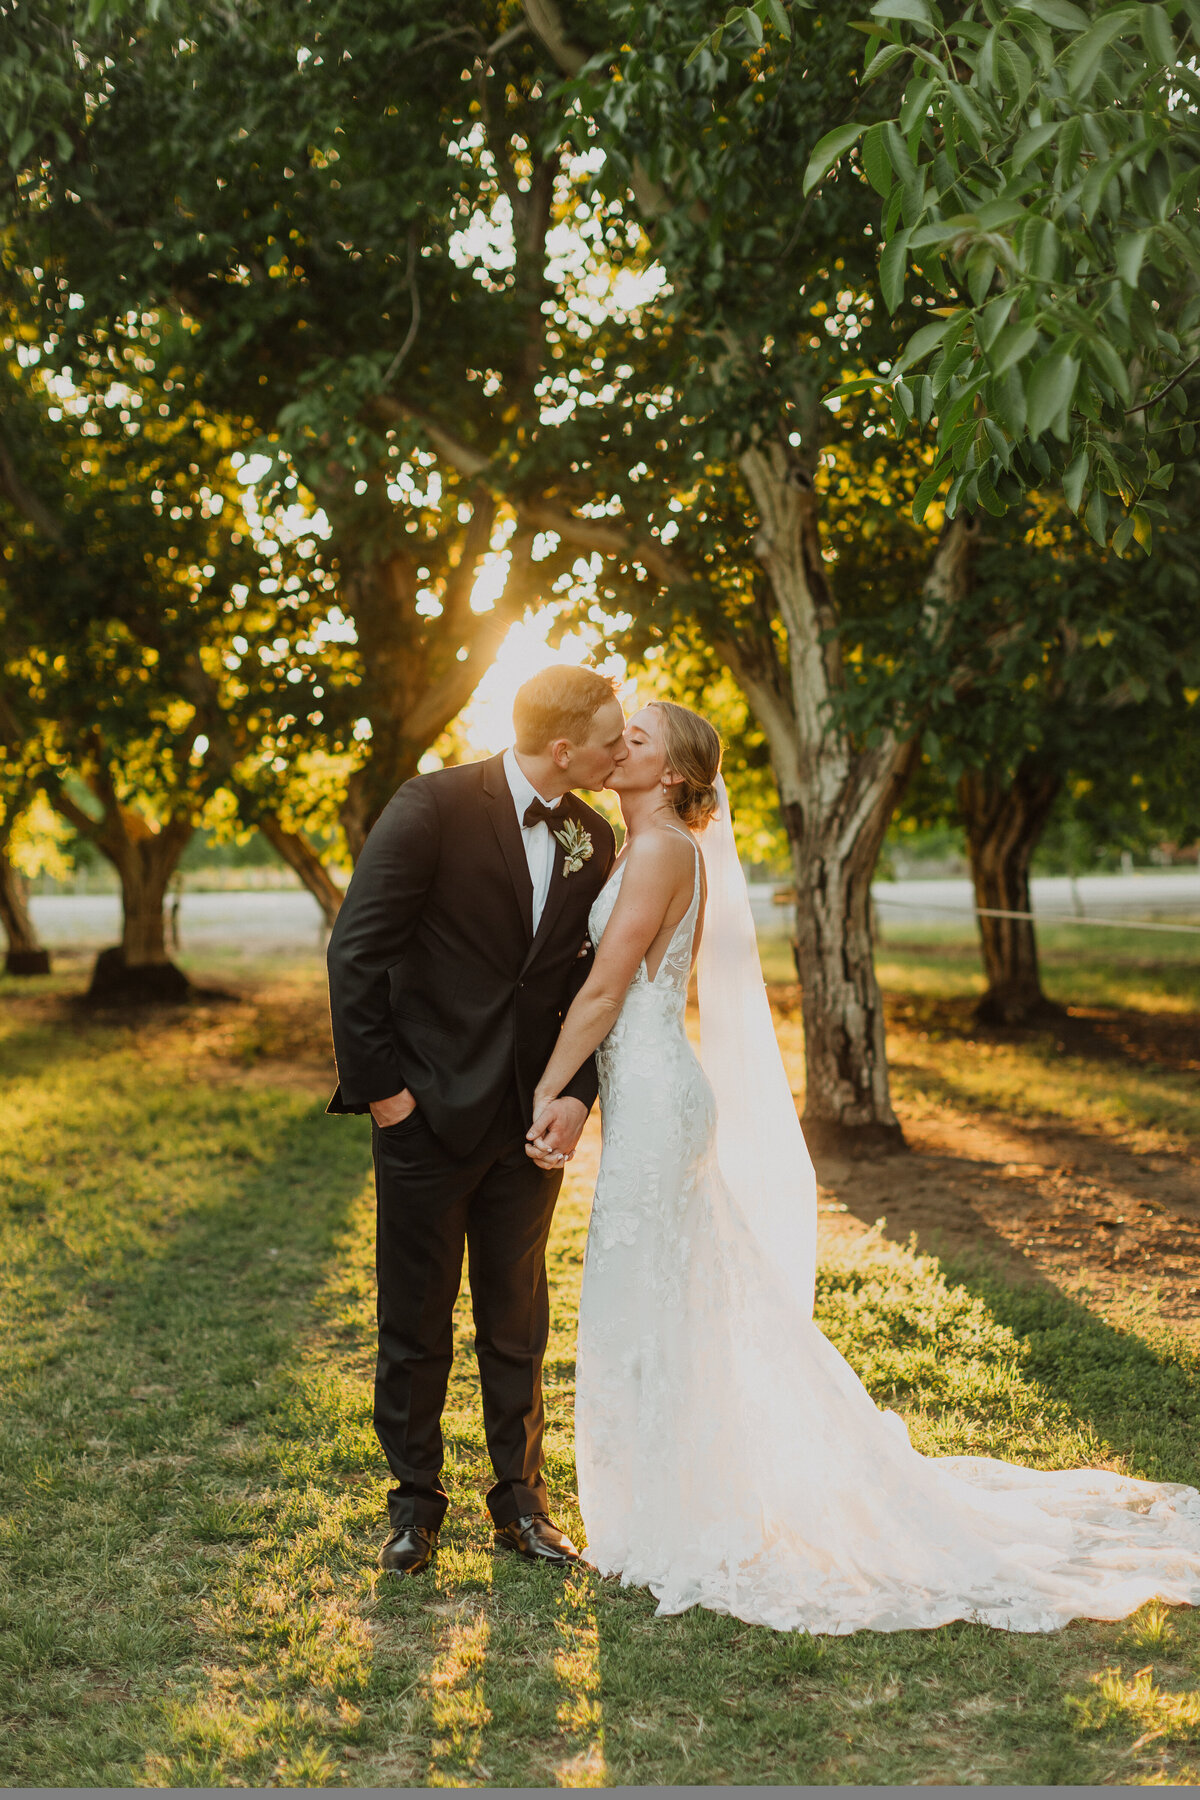 Bride and Groom portrait at sunset in a beautiful orchard